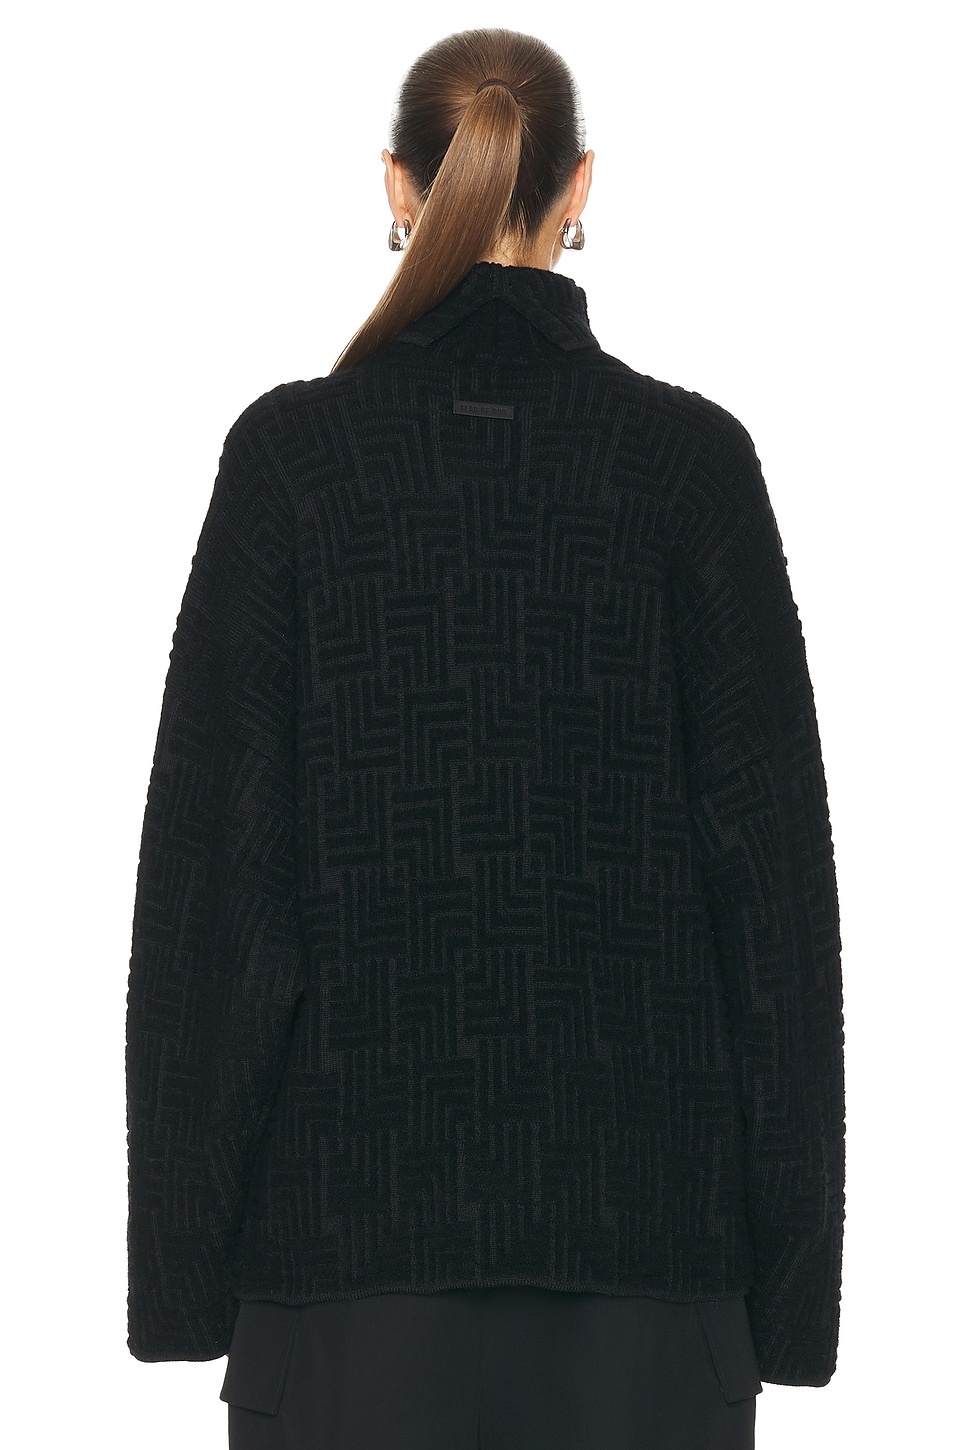 Straight Neck Relaxed Sweater - 3